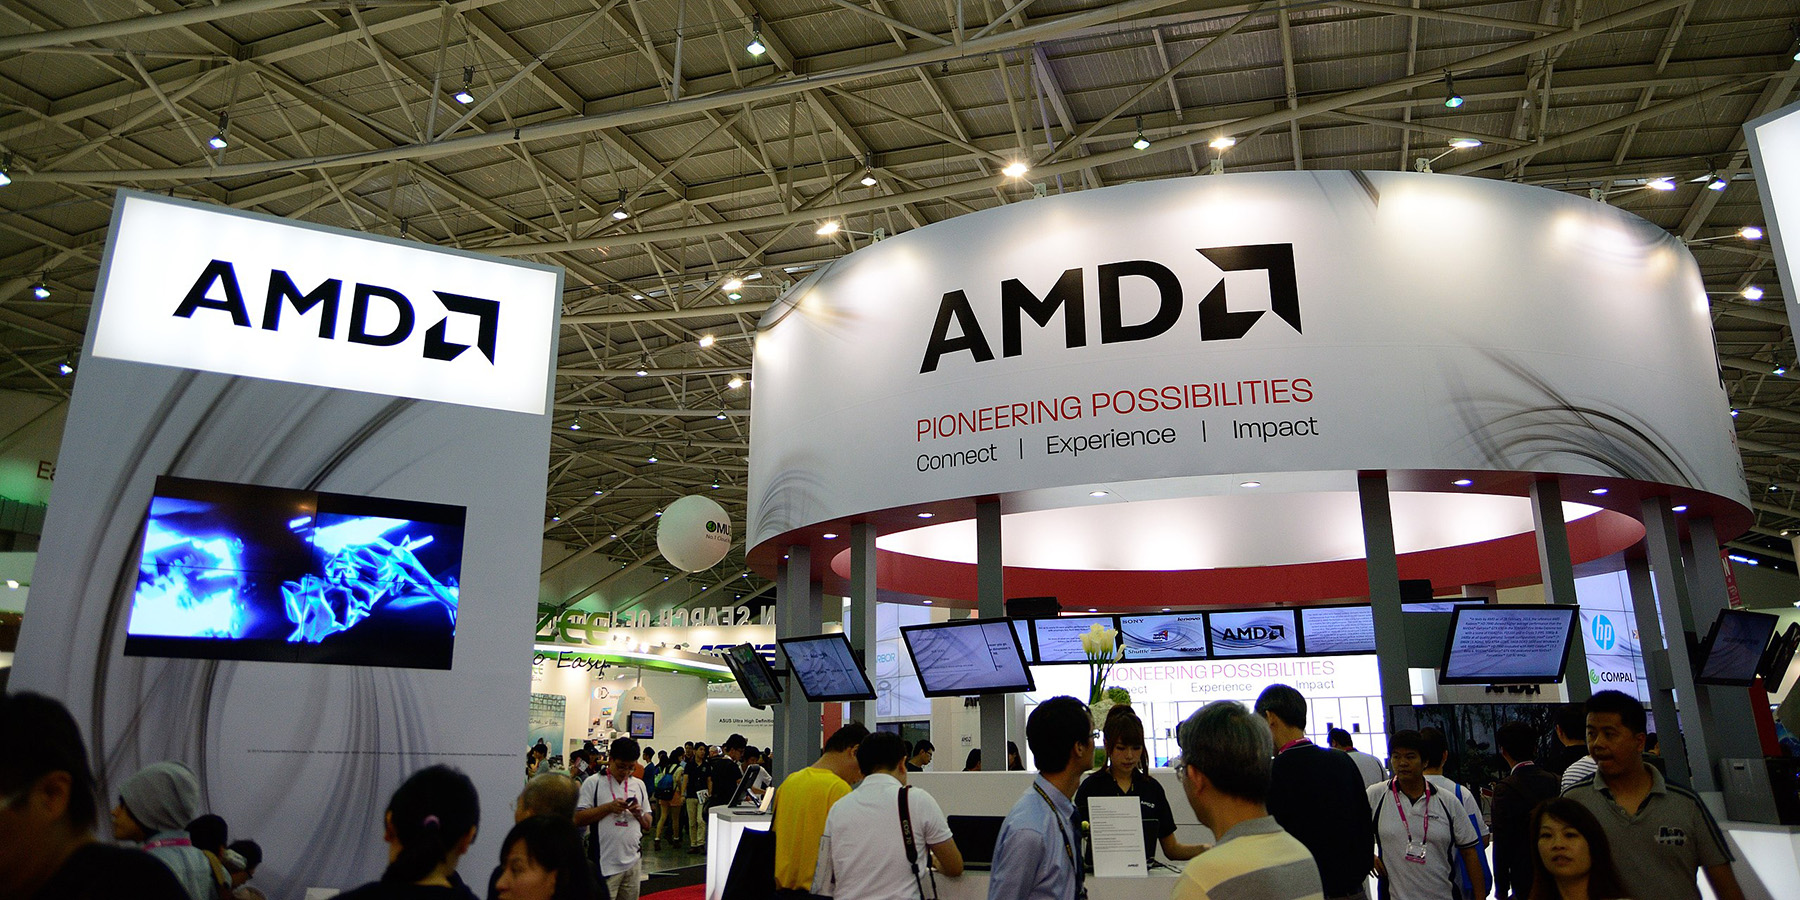 Porter’s Five Forces Analysis of AMD